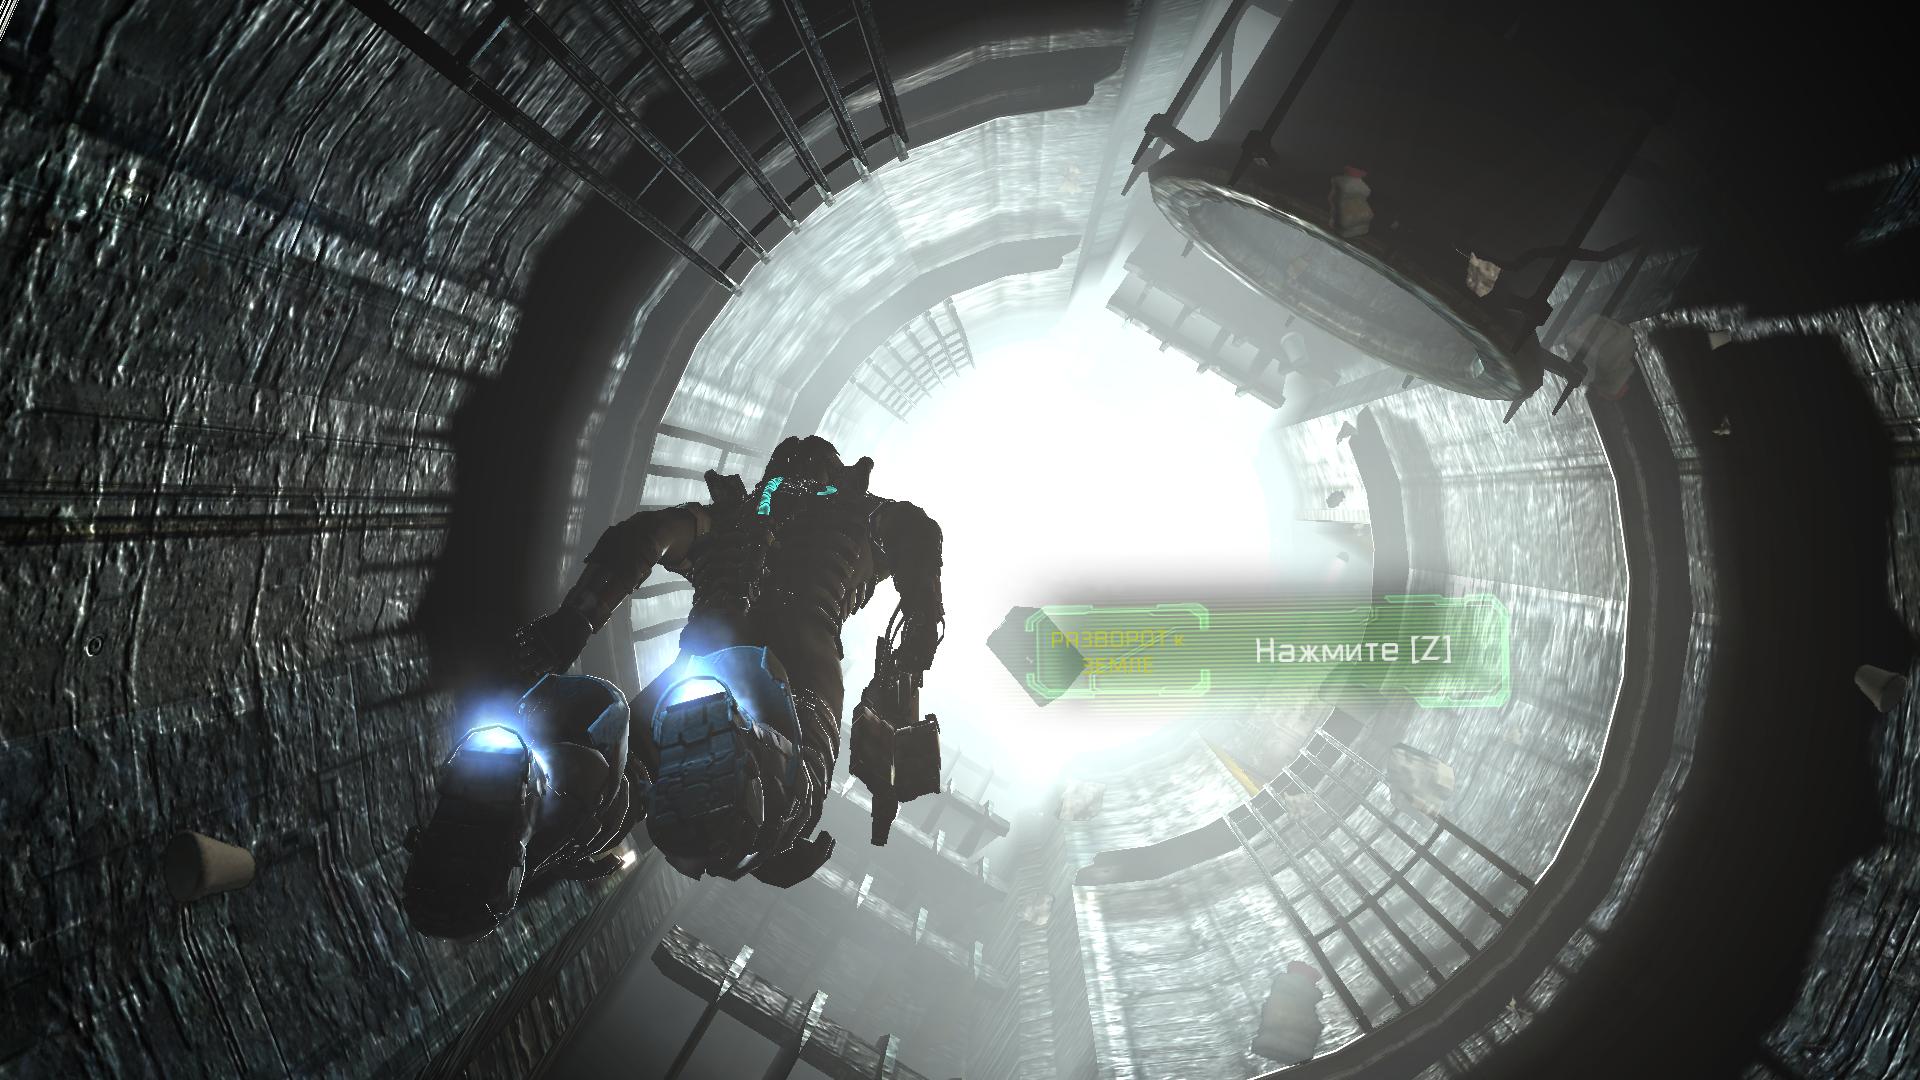 how to get to the language settings dead space 2